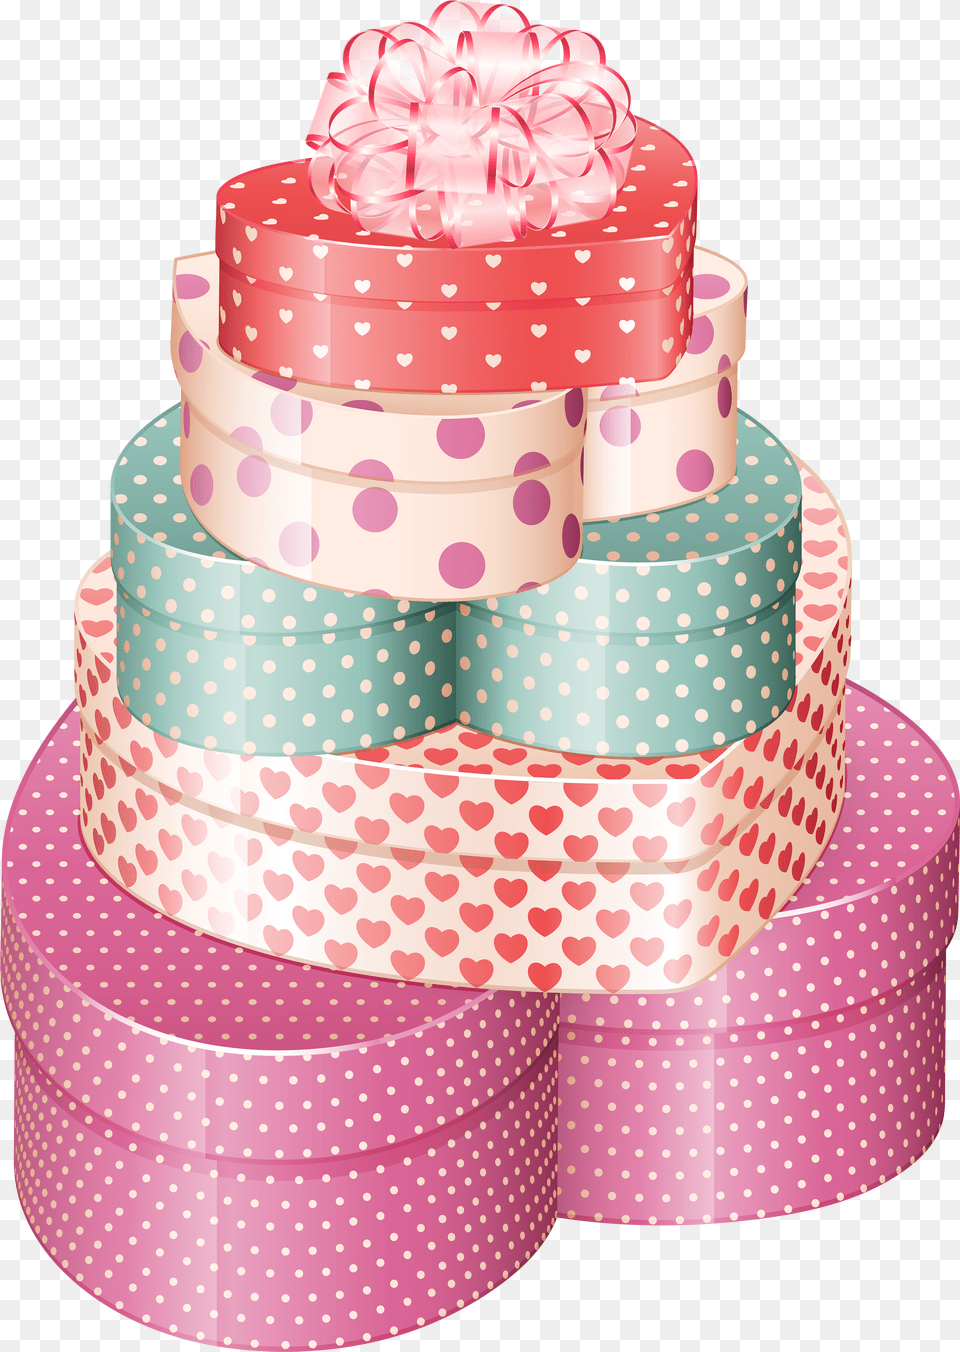 Heart Gift Boxes Clipart, Cake, Dessert, Food, Birthday Cake Png Image